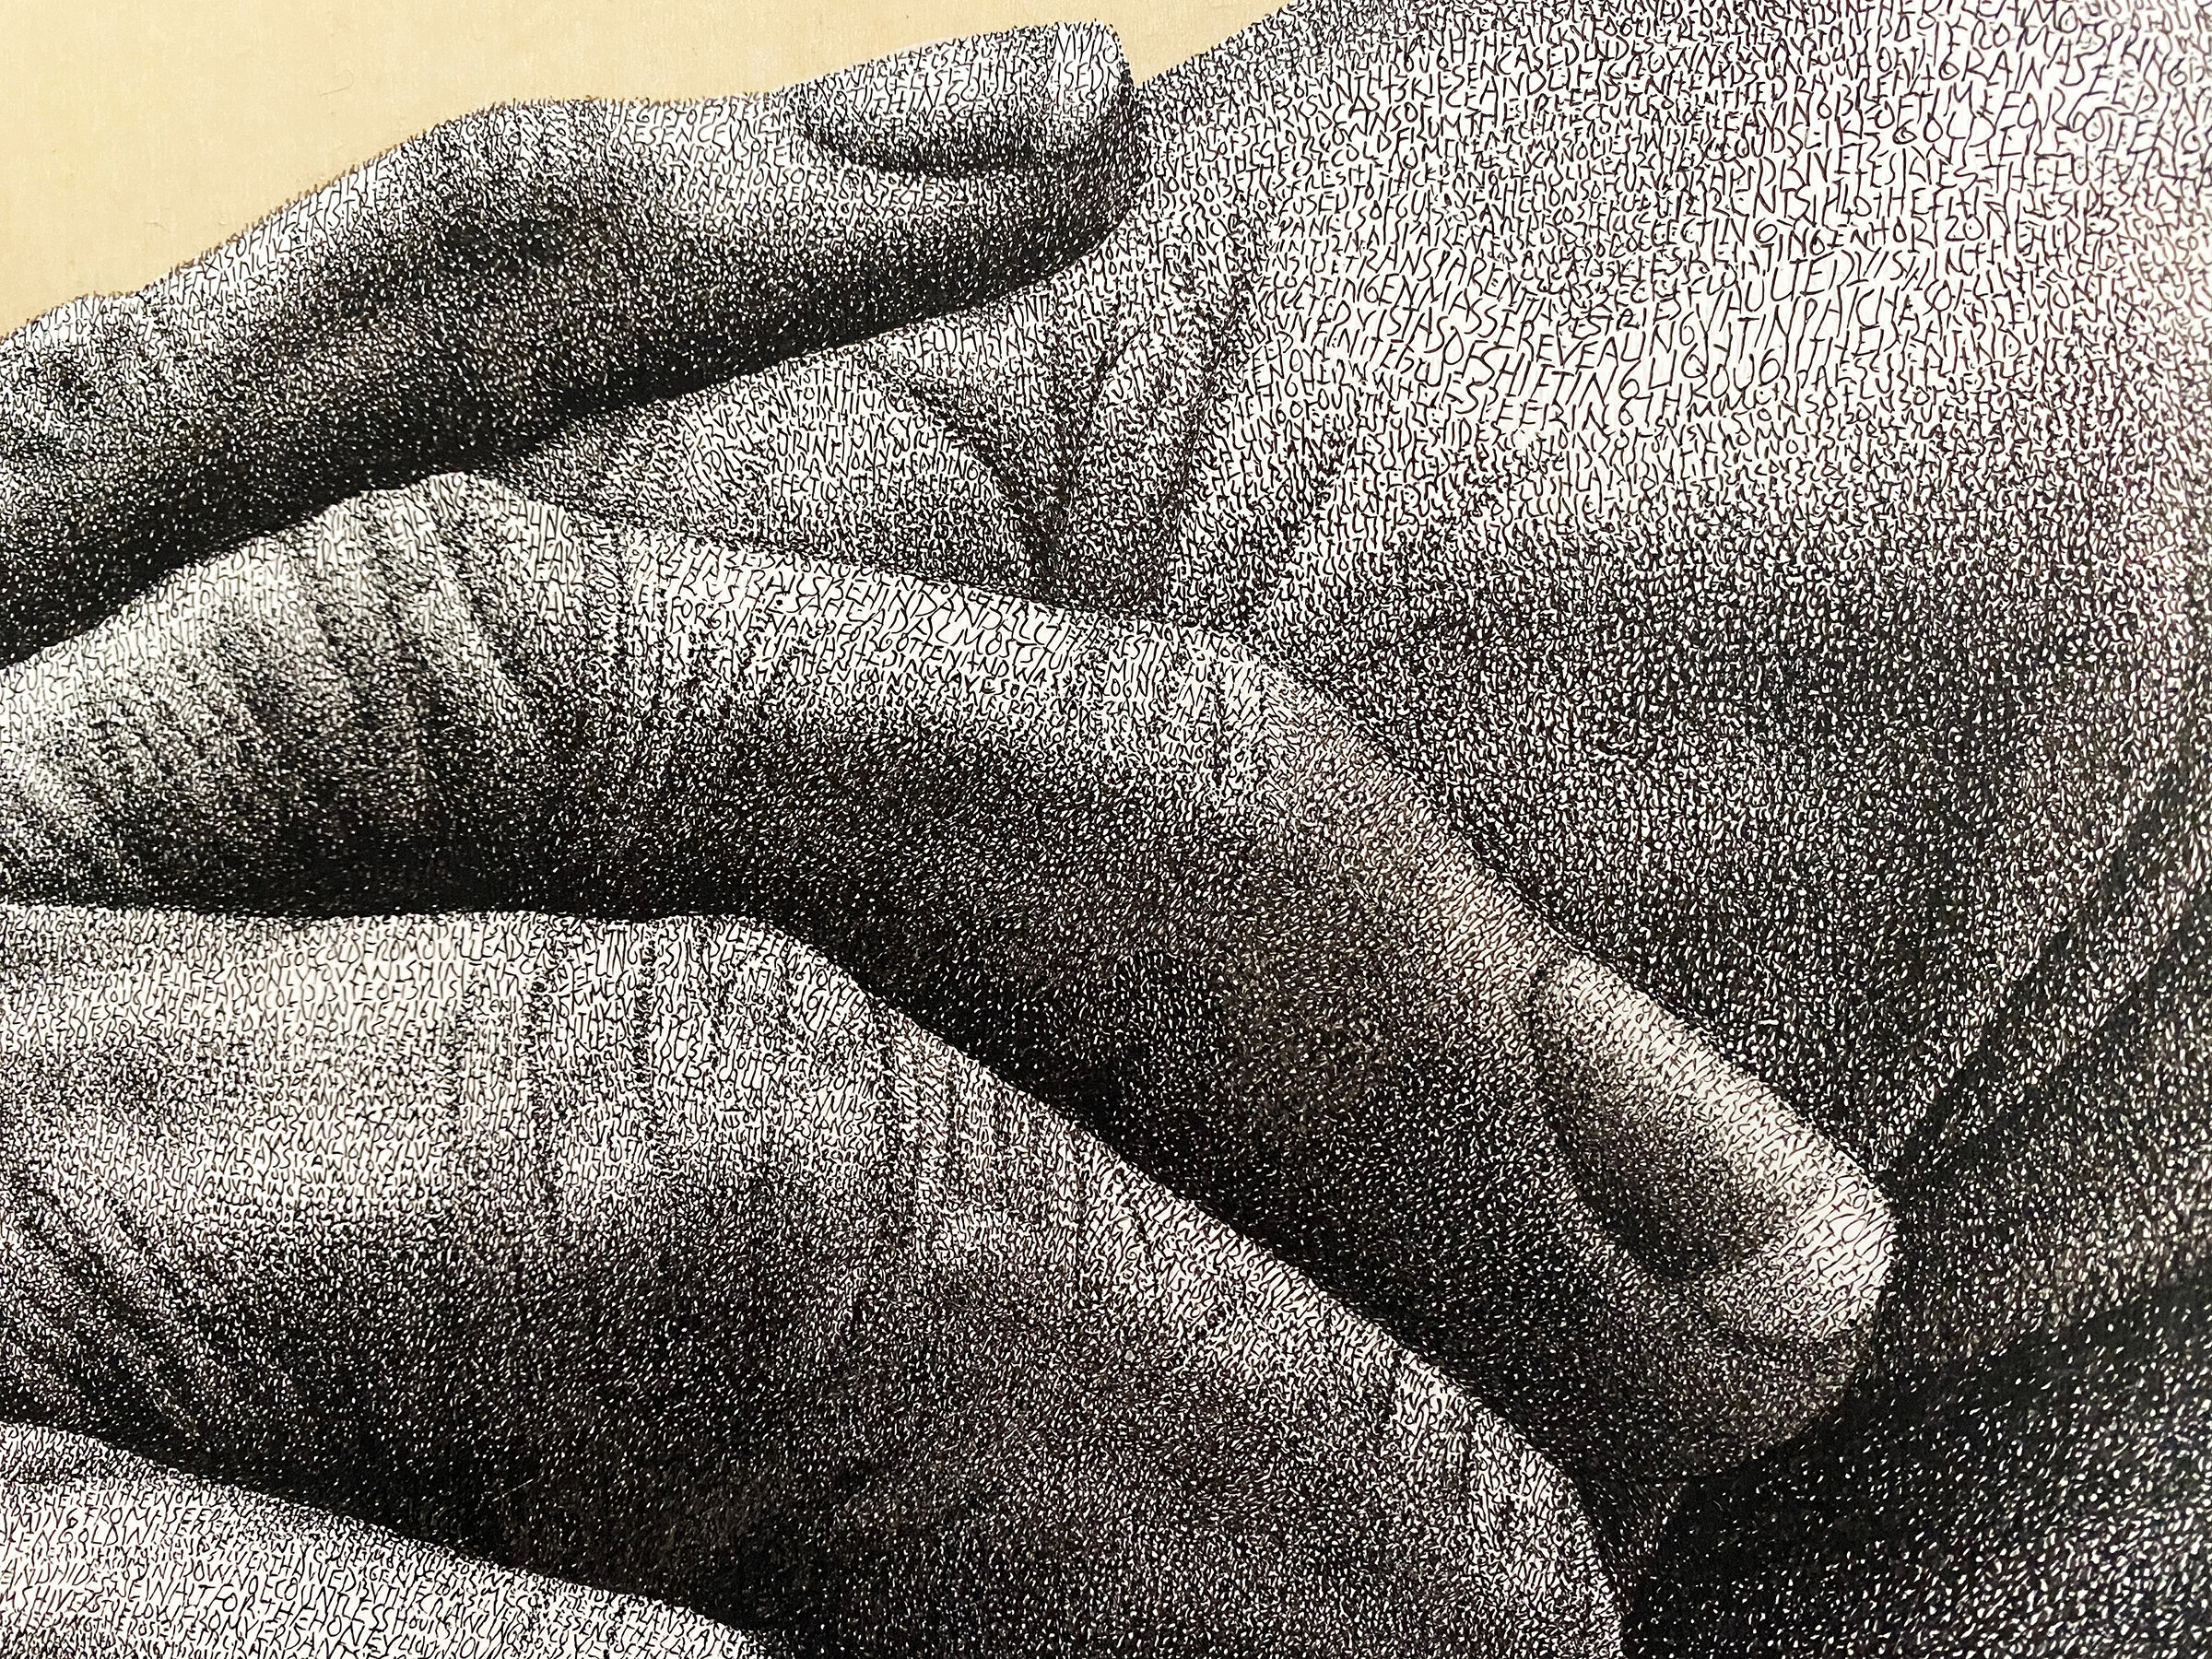 Detail XIII